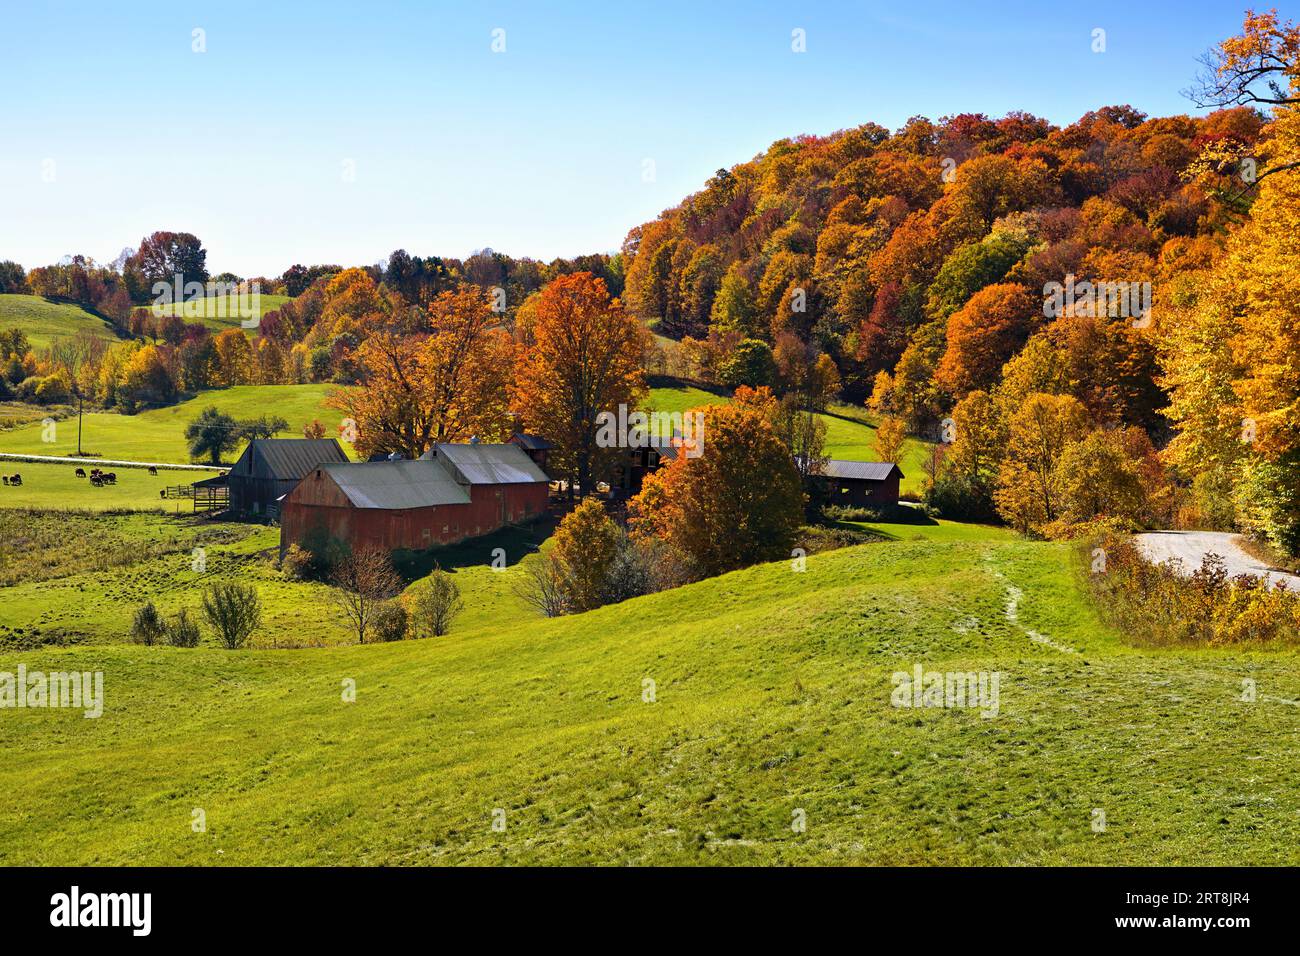 Autumn countryside with rustic red wooden barns and colorful fall leaves near Woodstock, Vermont, USA Stock Photo